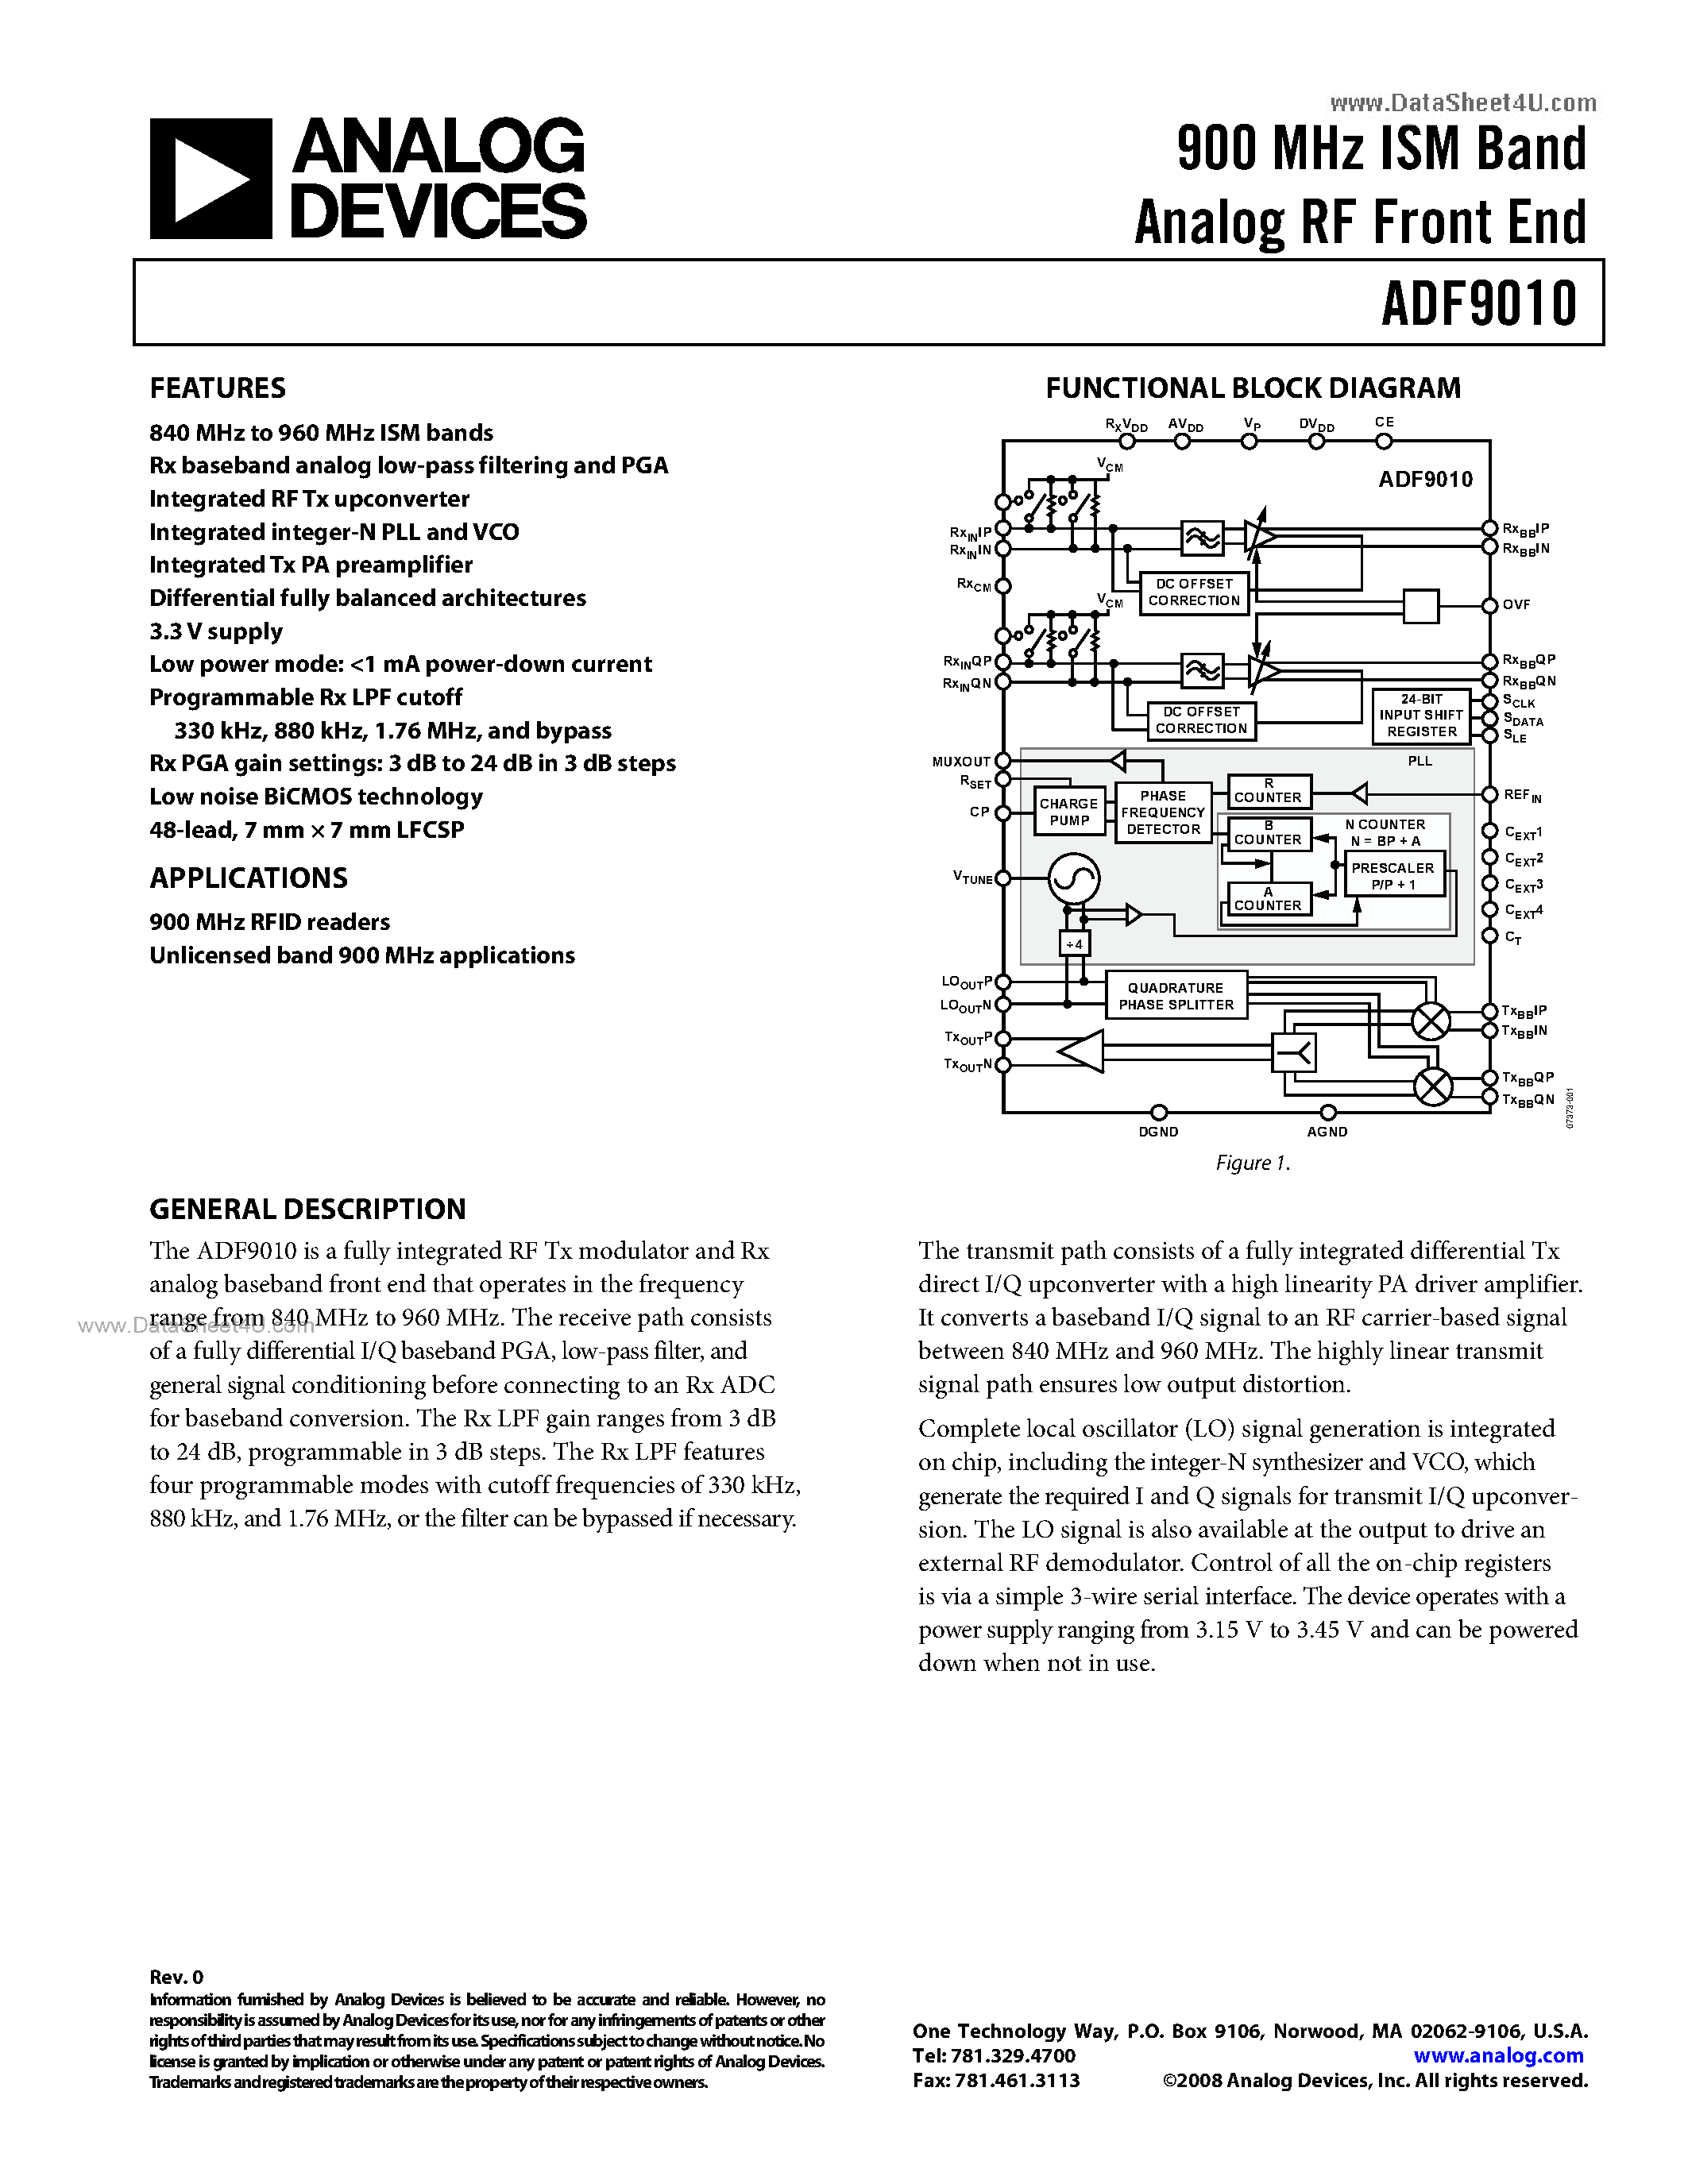 Datasheet ADF9010 - 900 MHz ISM Band Analog RF Front End page 1